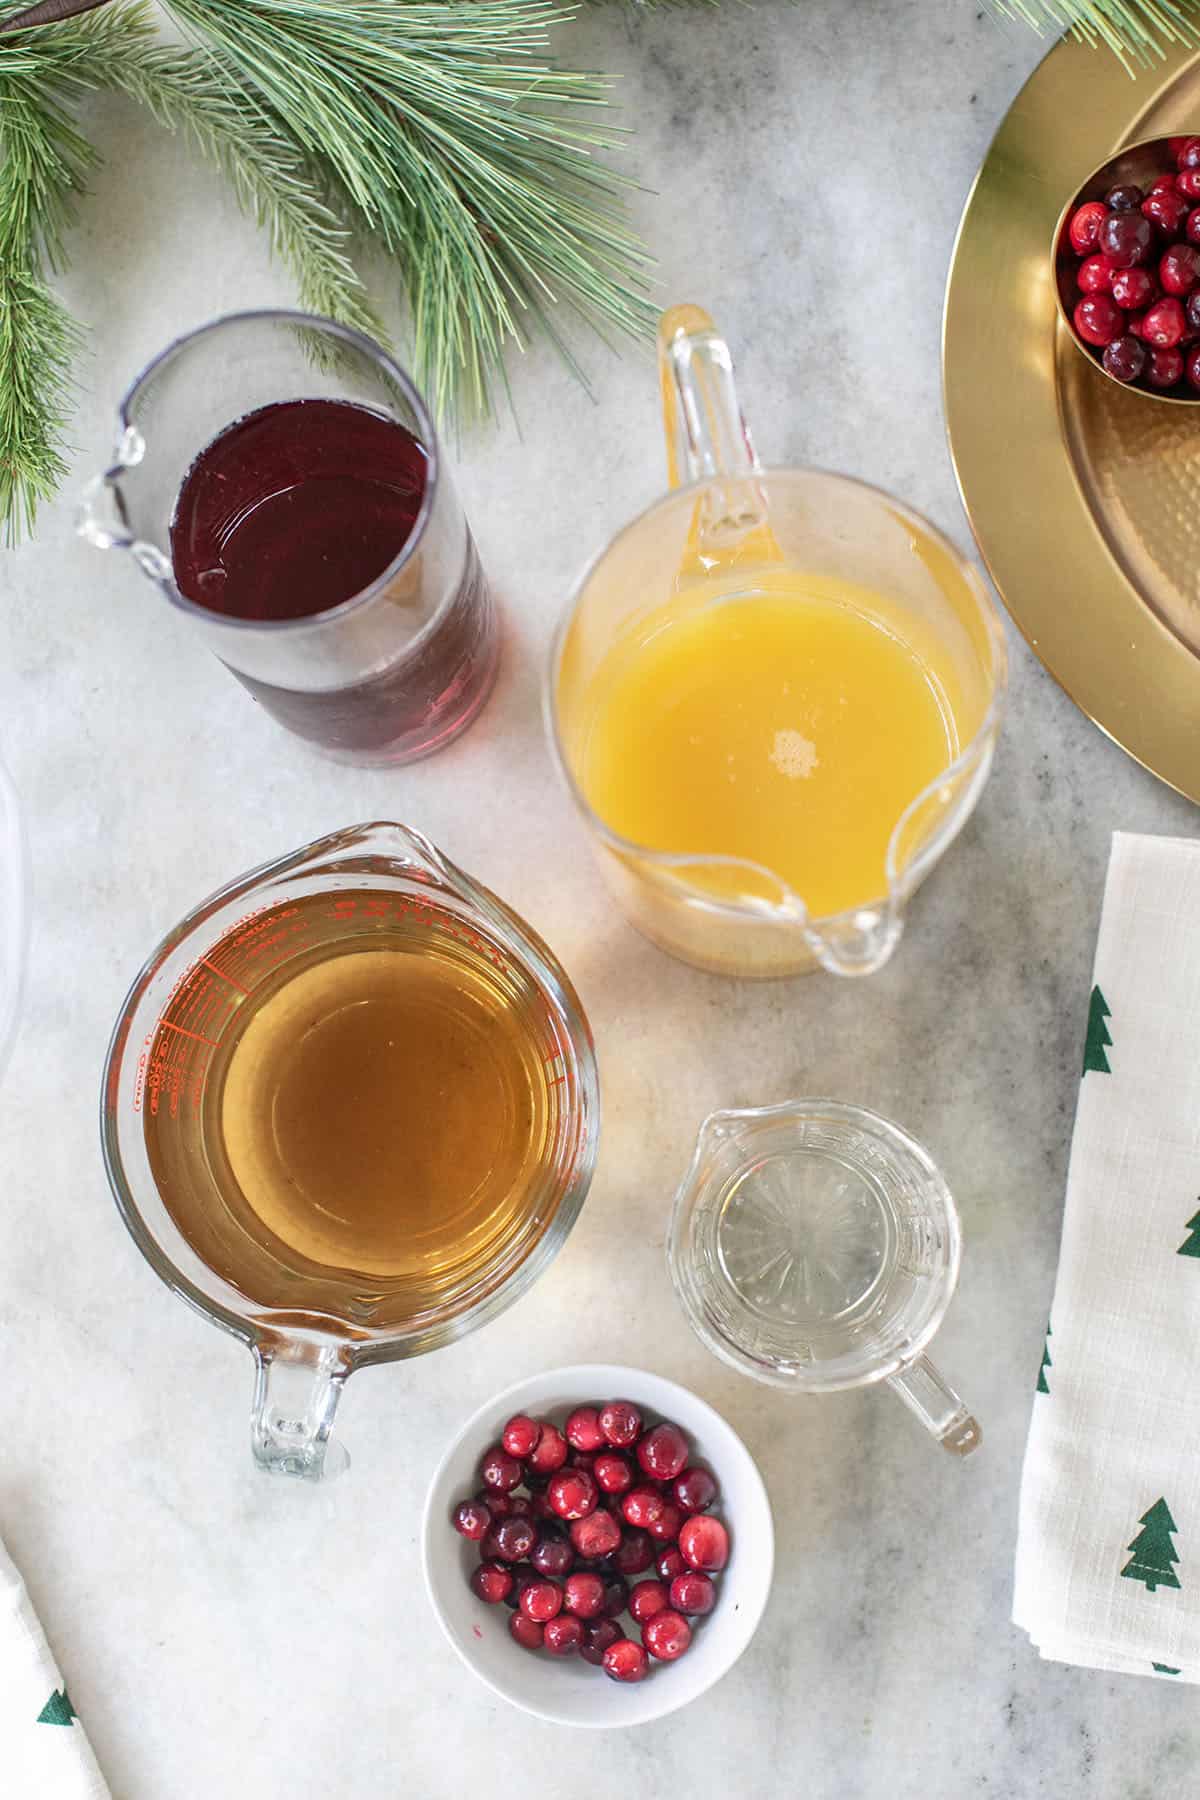 ingredients to make a Christmas punch.